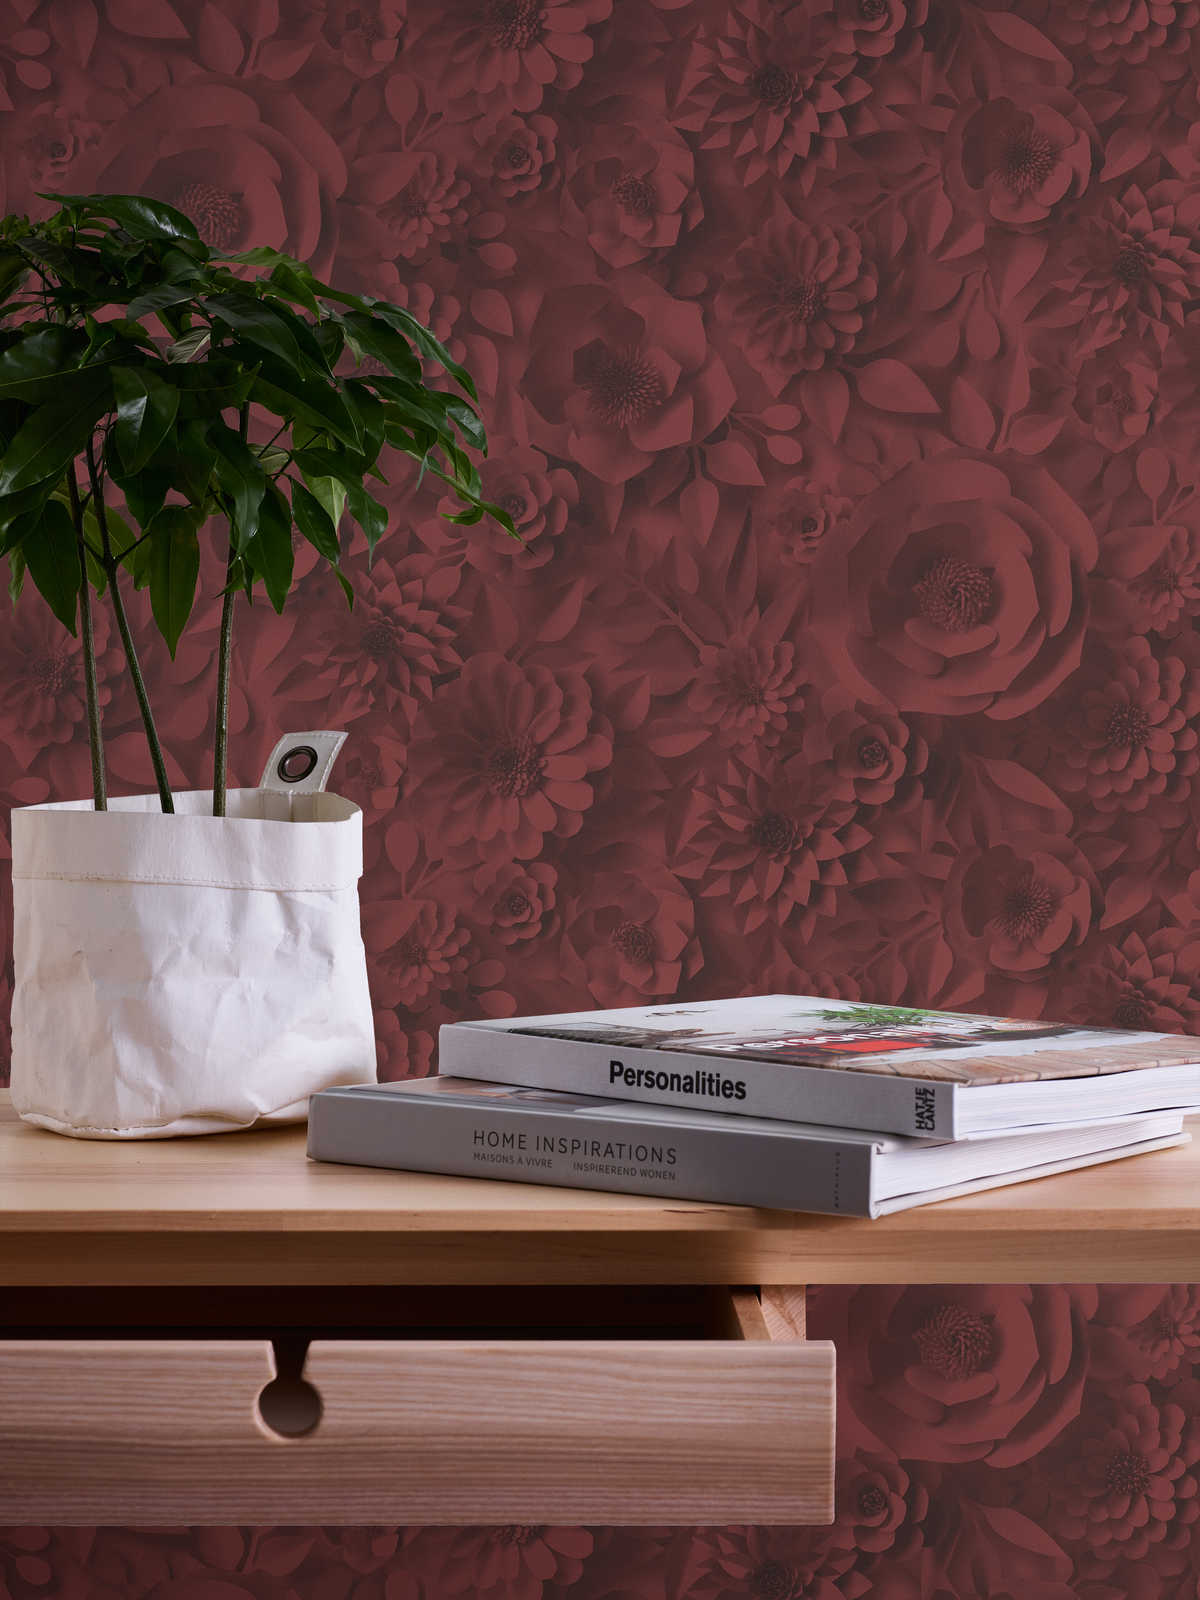             3D wallpaper with paper flowers, graphic floral pattern - red
        